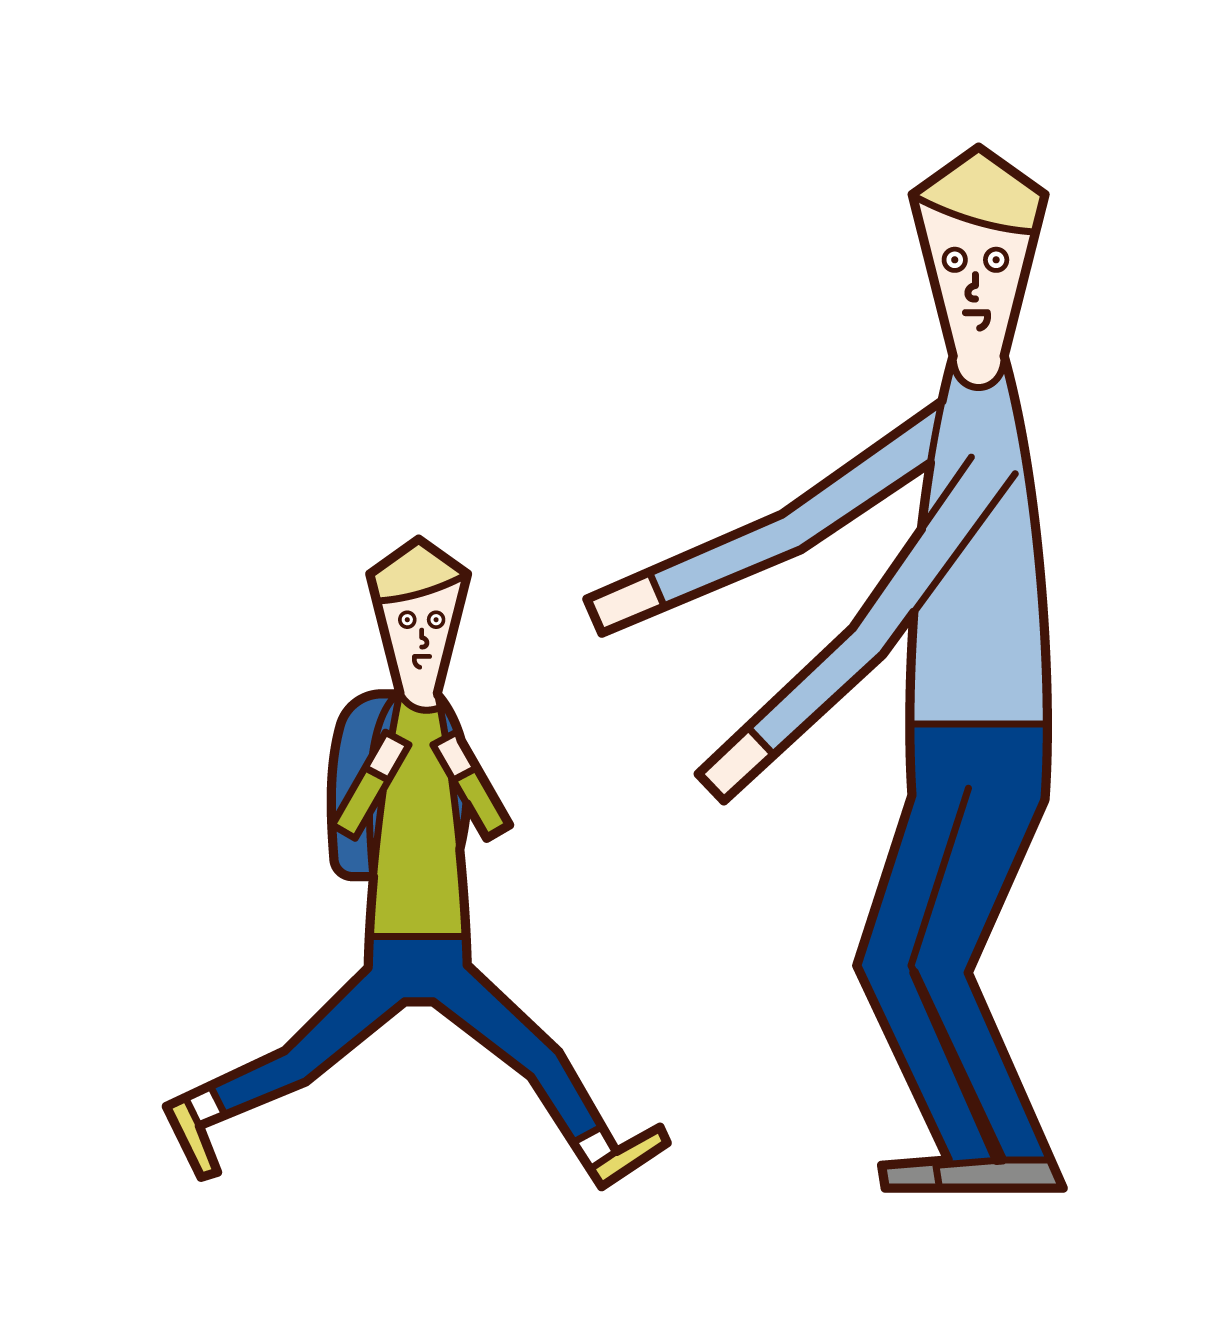 Illustration of a father greeting a child (son)